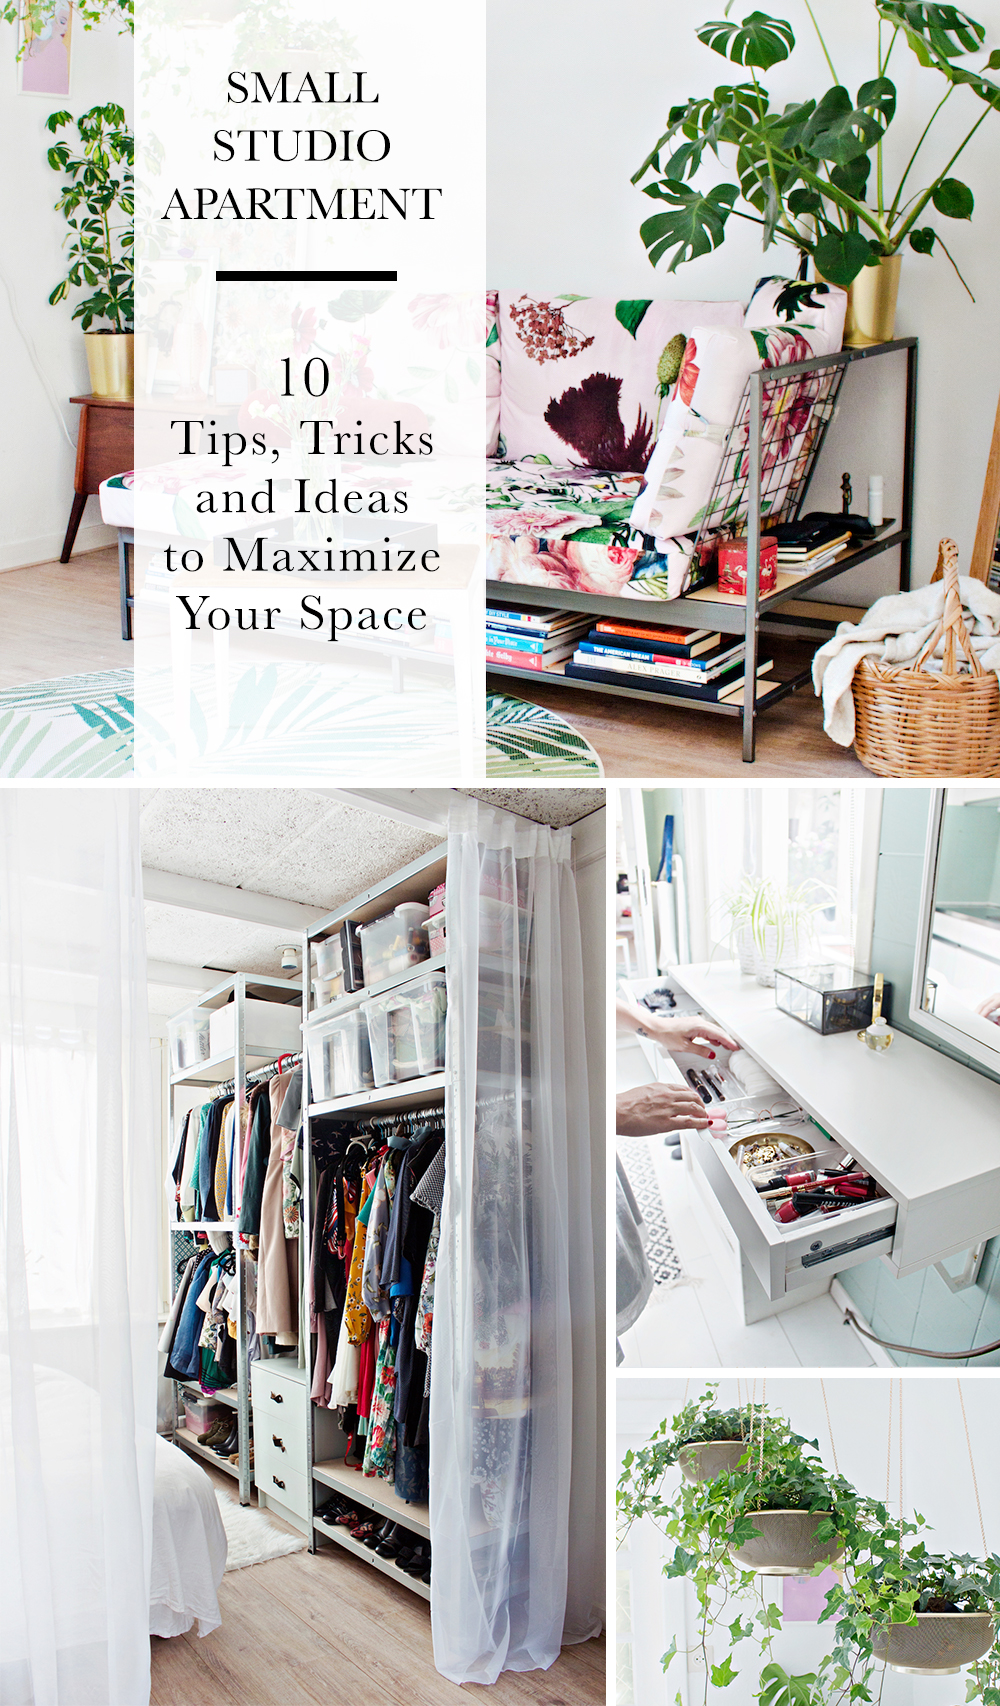 Our Hacks for Small and Studio Apartment Organization